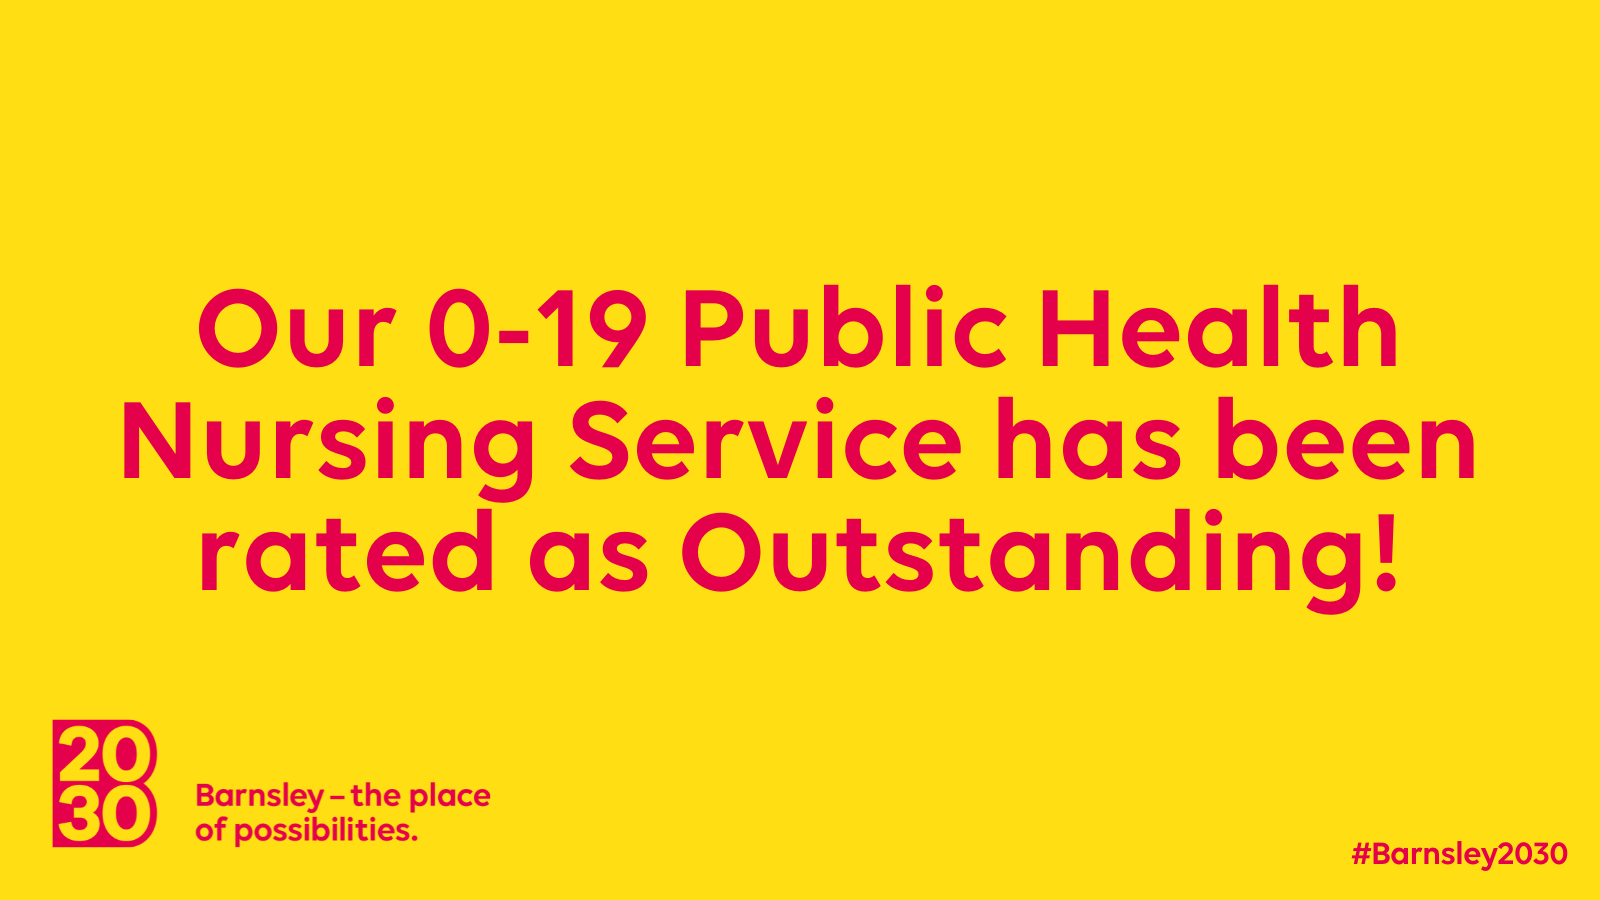 Our 0-19 Public Health Nursing Service has been rated Outstanding!